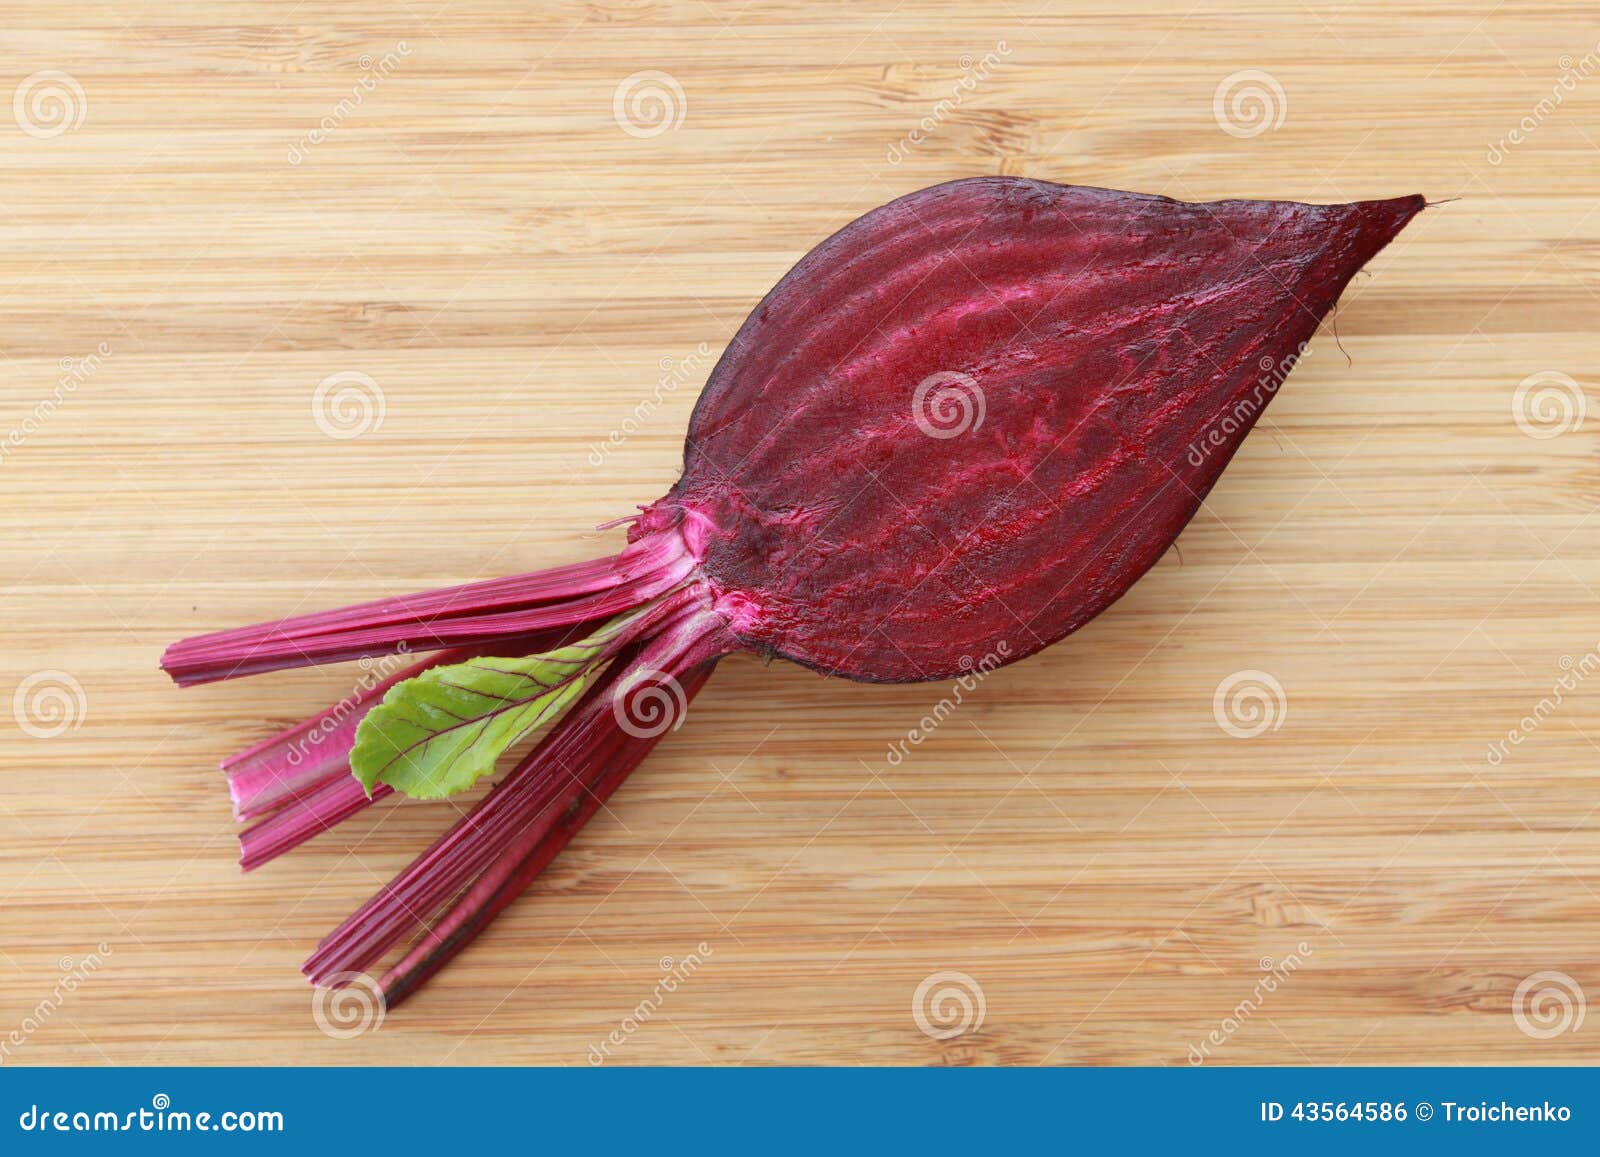 young beets